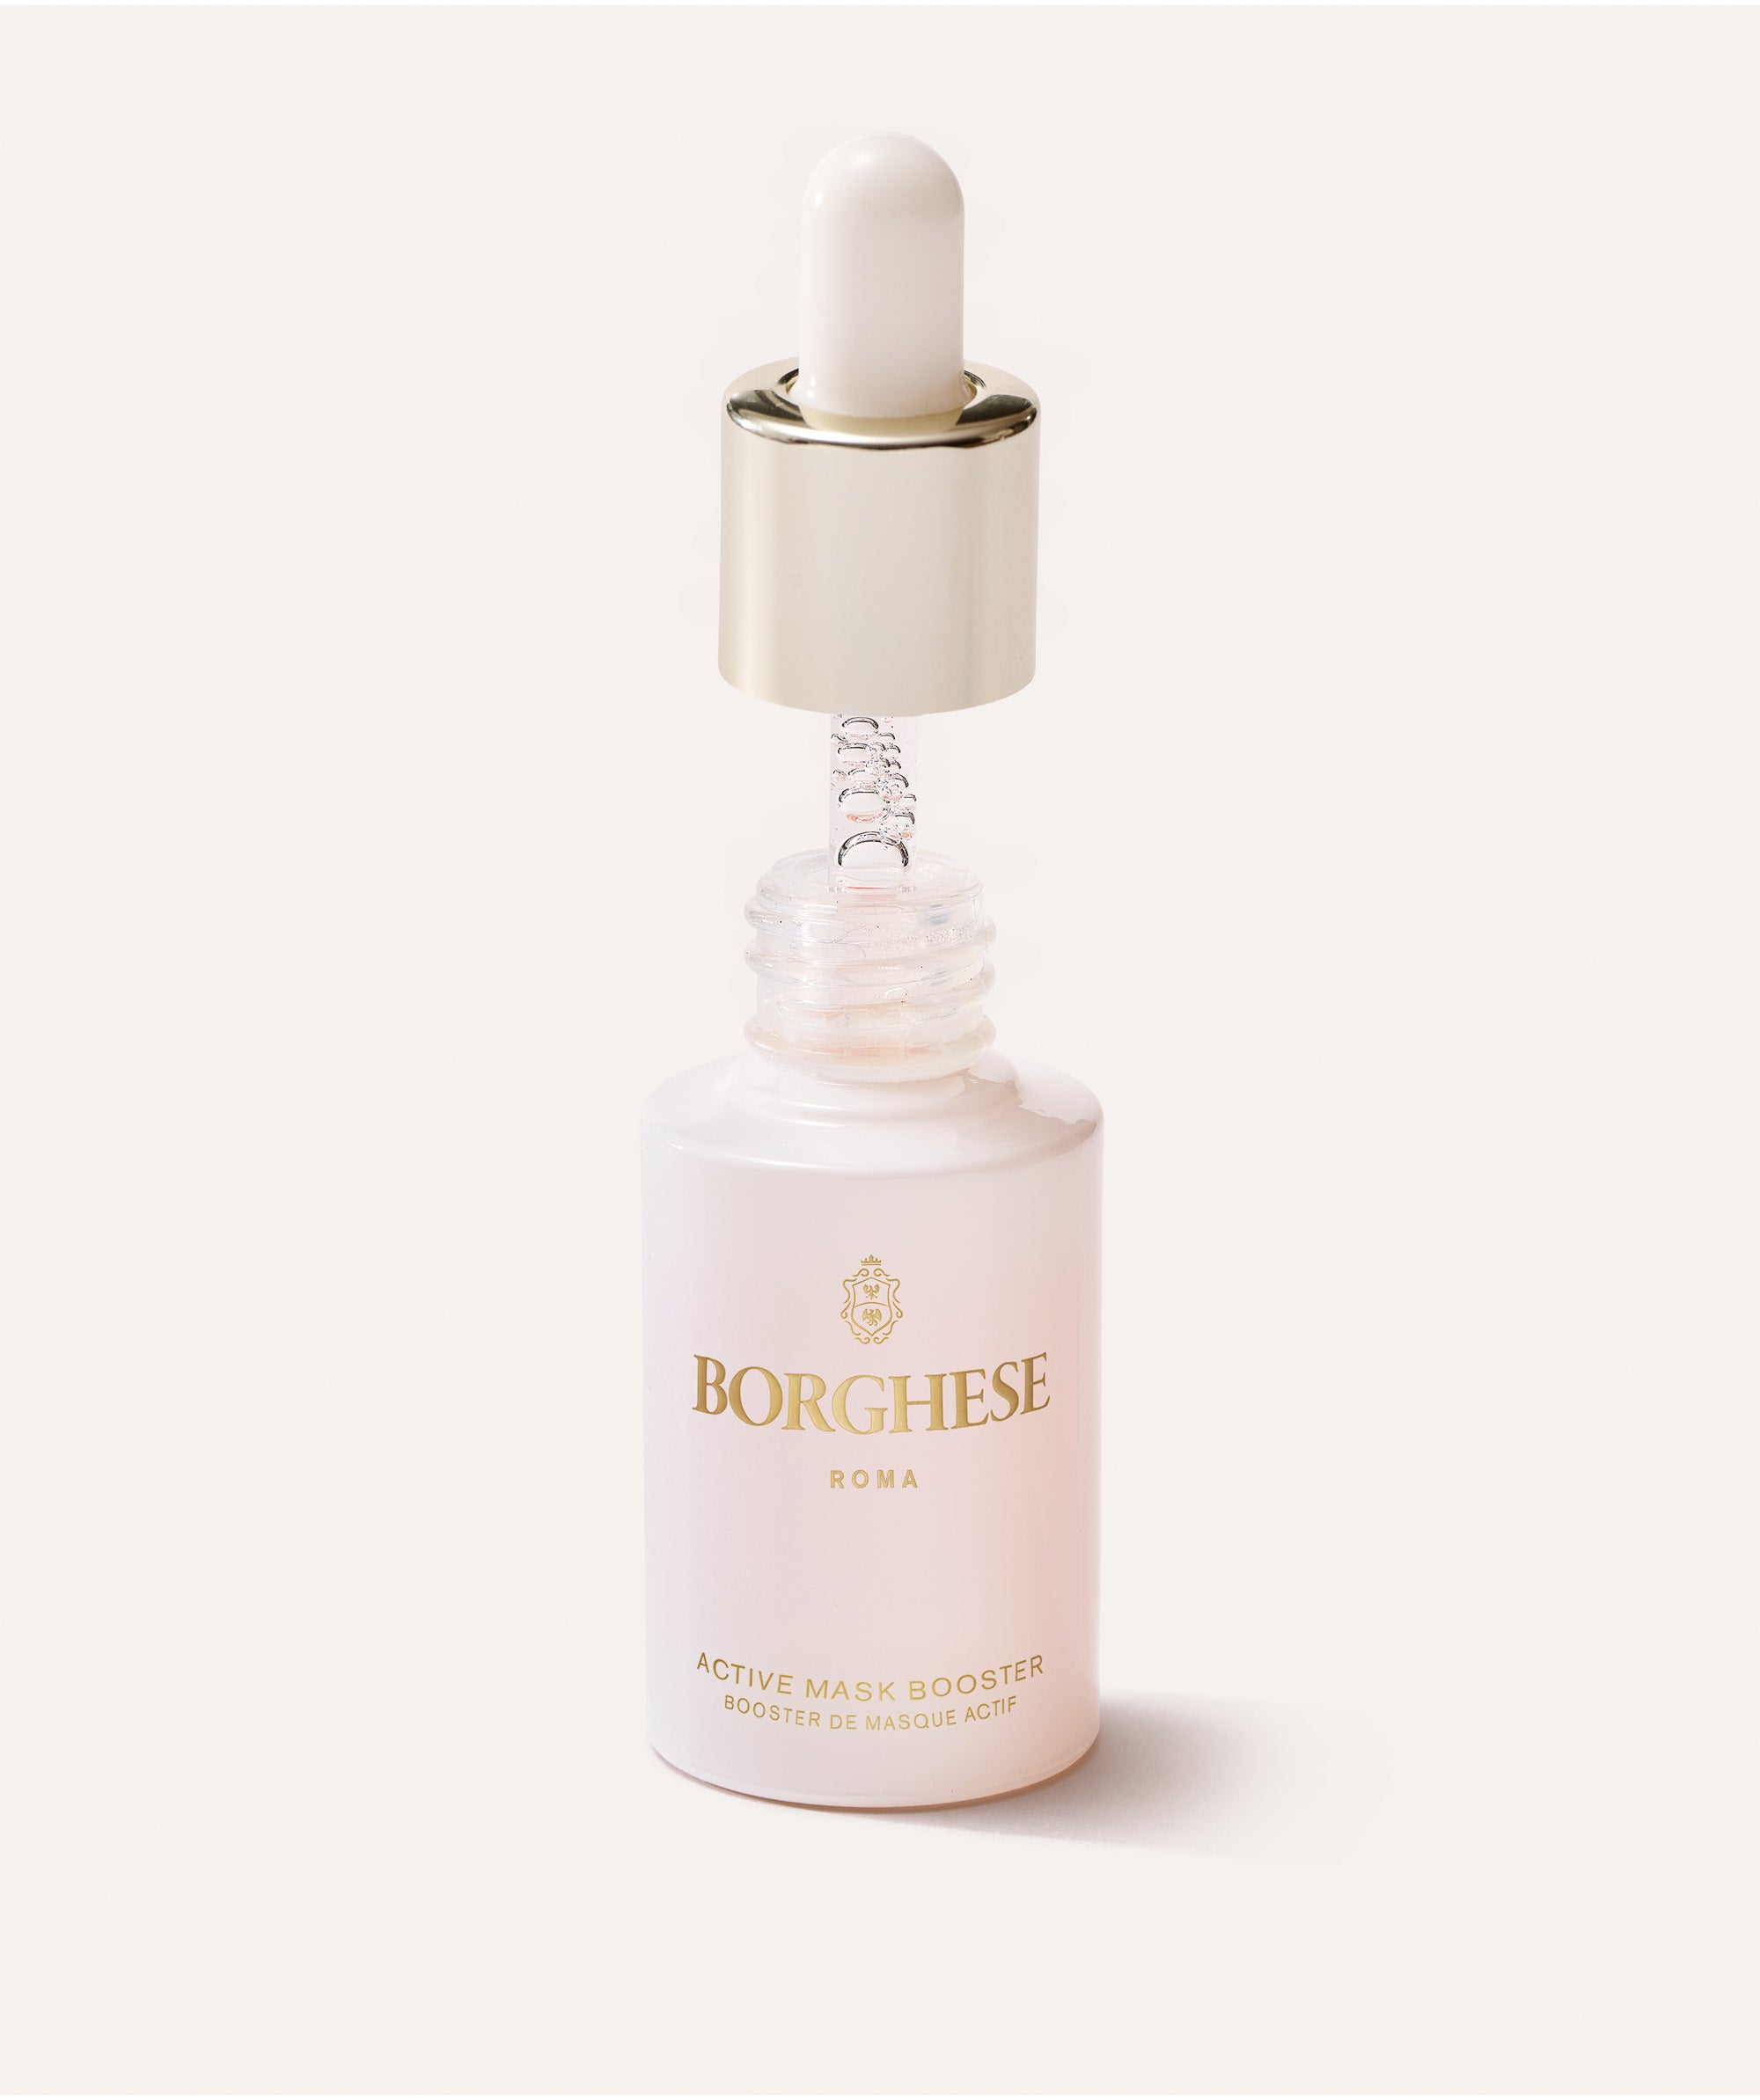 Picture of Active Mask Booster bottle with dropper inside bottle